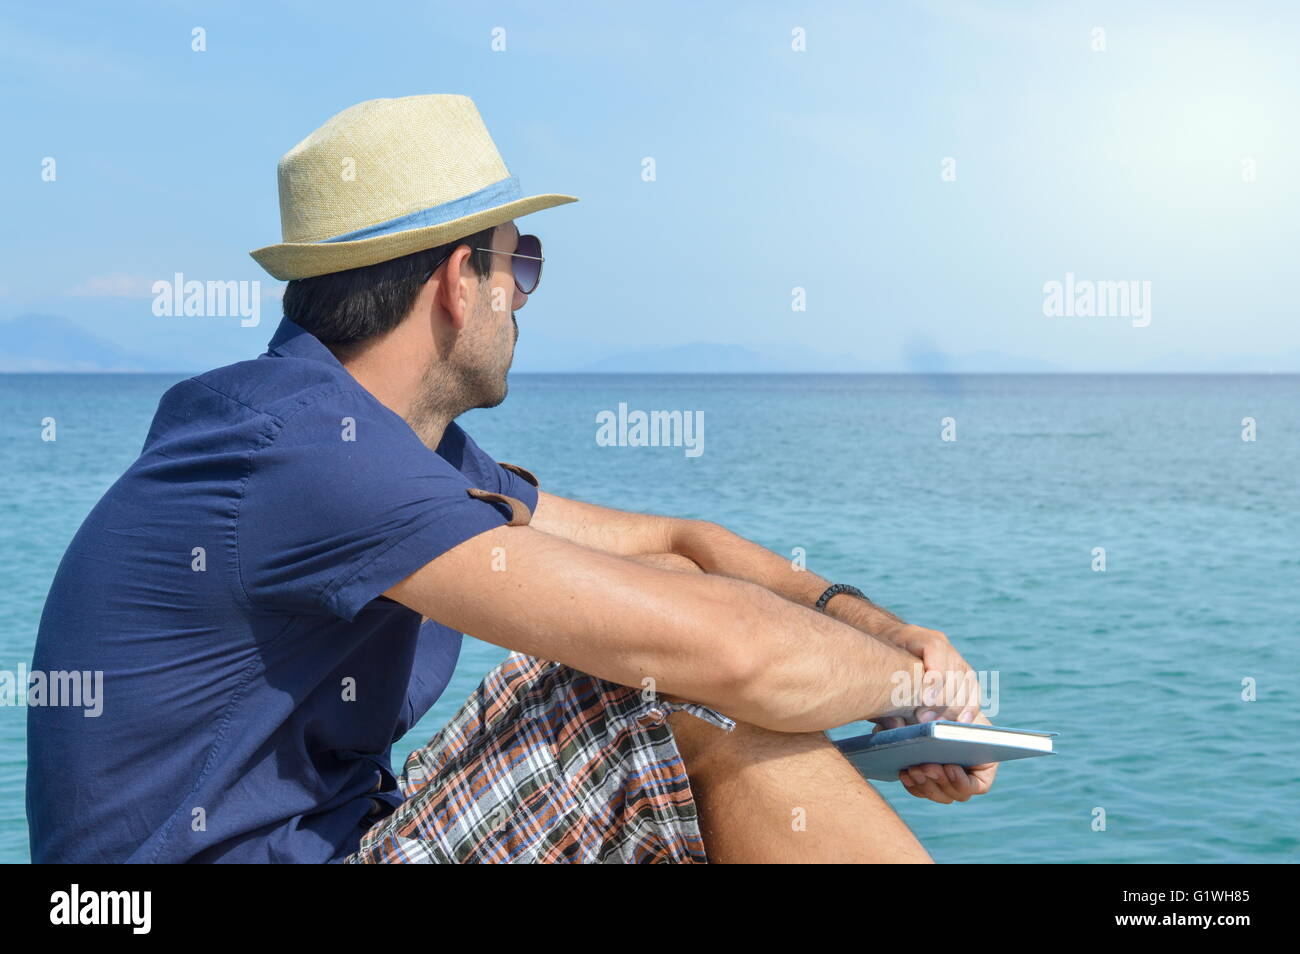 Man in blue shirt sitting on the dock holding a book Stock Photo